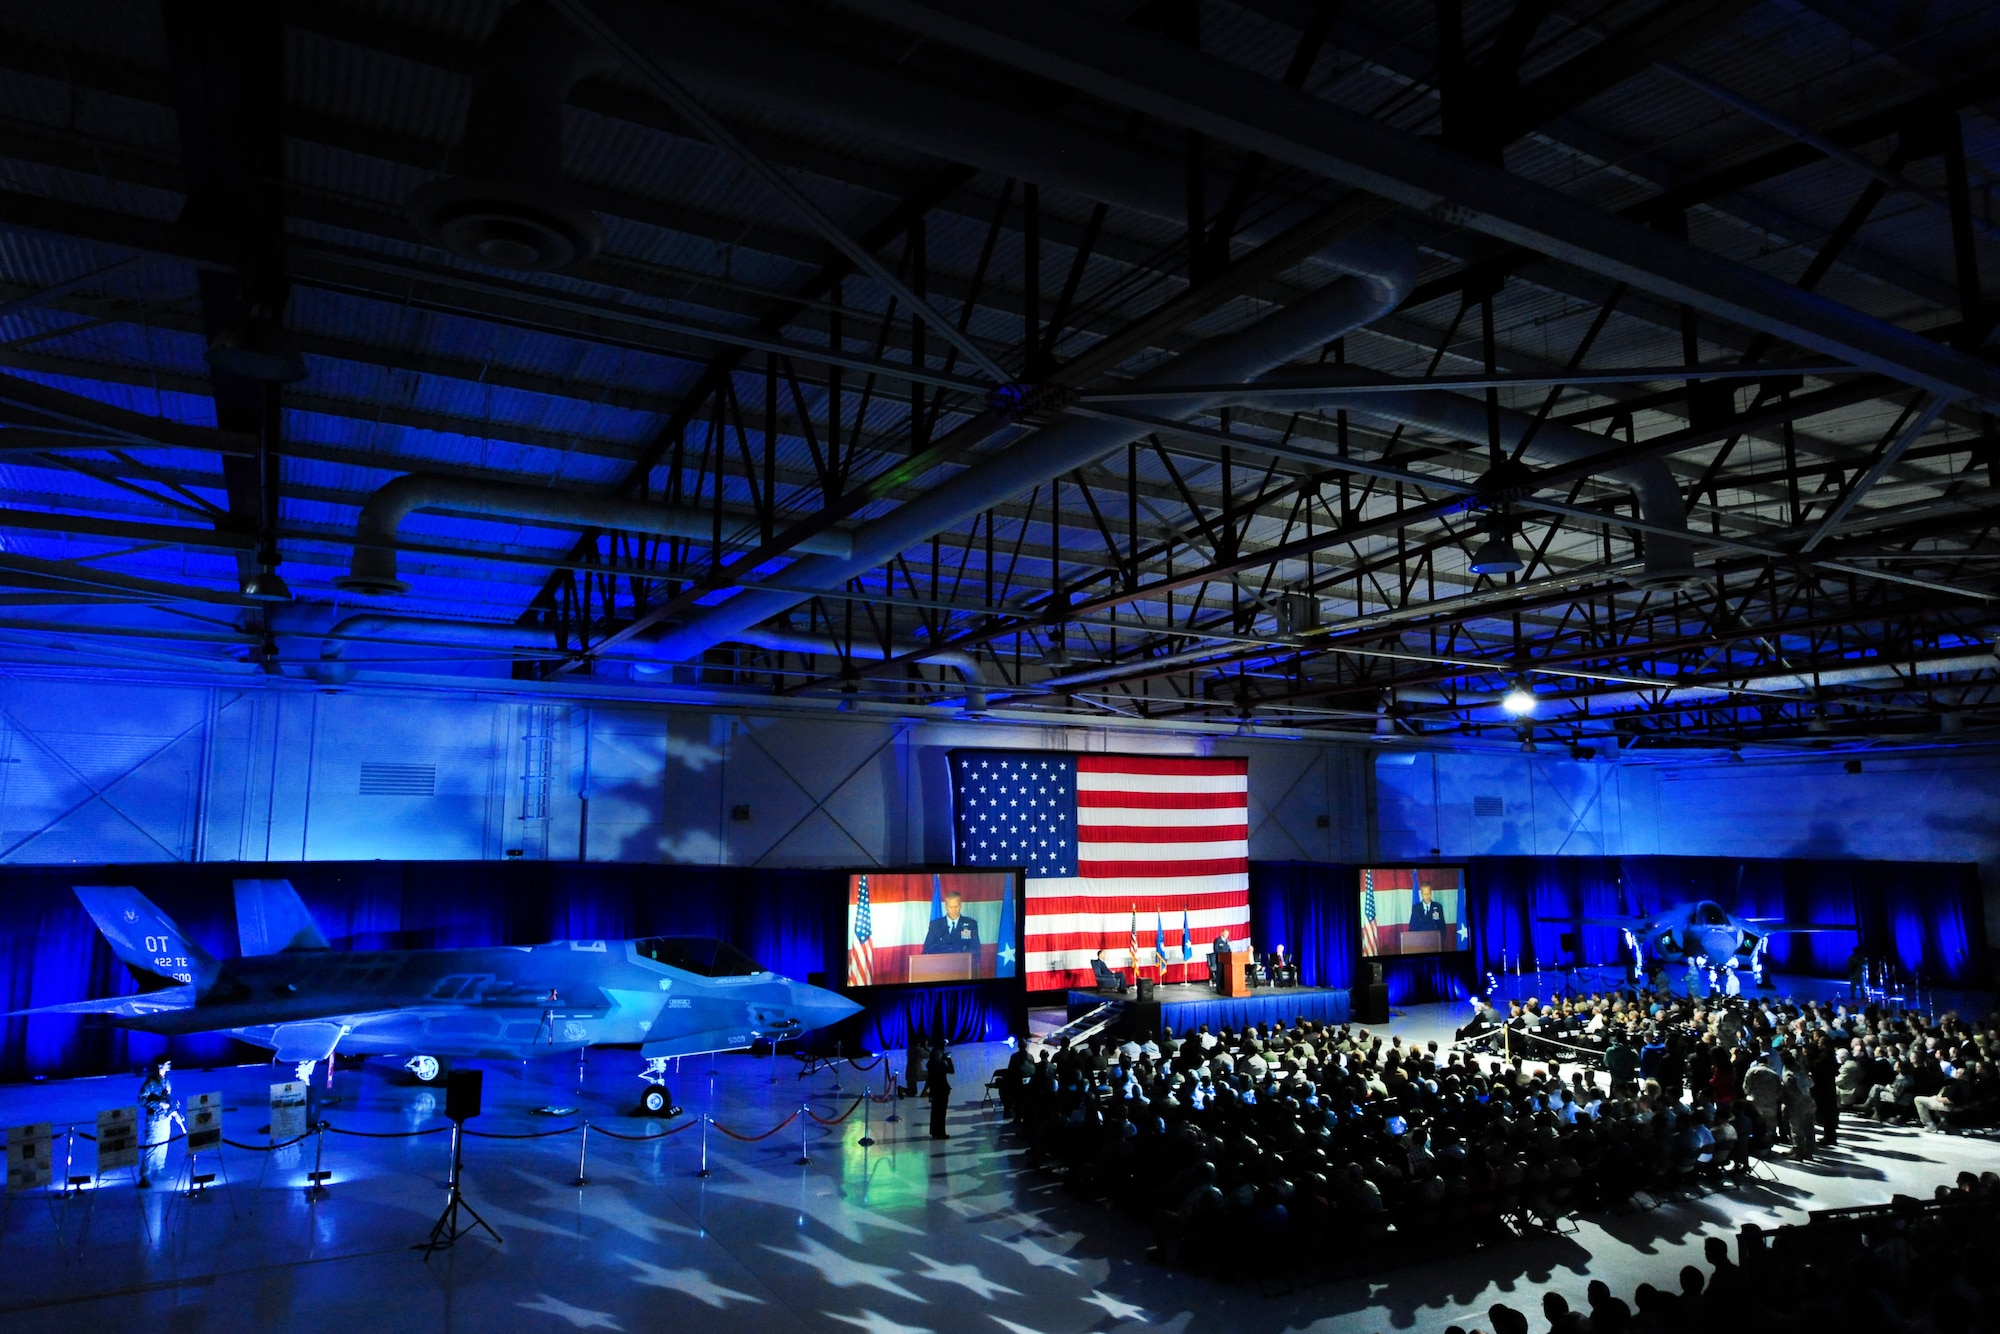 Maj. Gen. Jeffery Lofgren, U.S. Air Force Warfare Center commander, provides remarks during the F-35A Lightning II arrival ceremony March 19, 2013, in the Thunderbird Hangar on Nellis Air Force Base, Nev.  The 422nd Test and Evaluation Squadron will design the tactics for the F-35A. The squadron will also determine how to integrate the F-35A with other aircraft in the Air Force inventory. (U.S. Air Force photo by Lawrence Crespo)